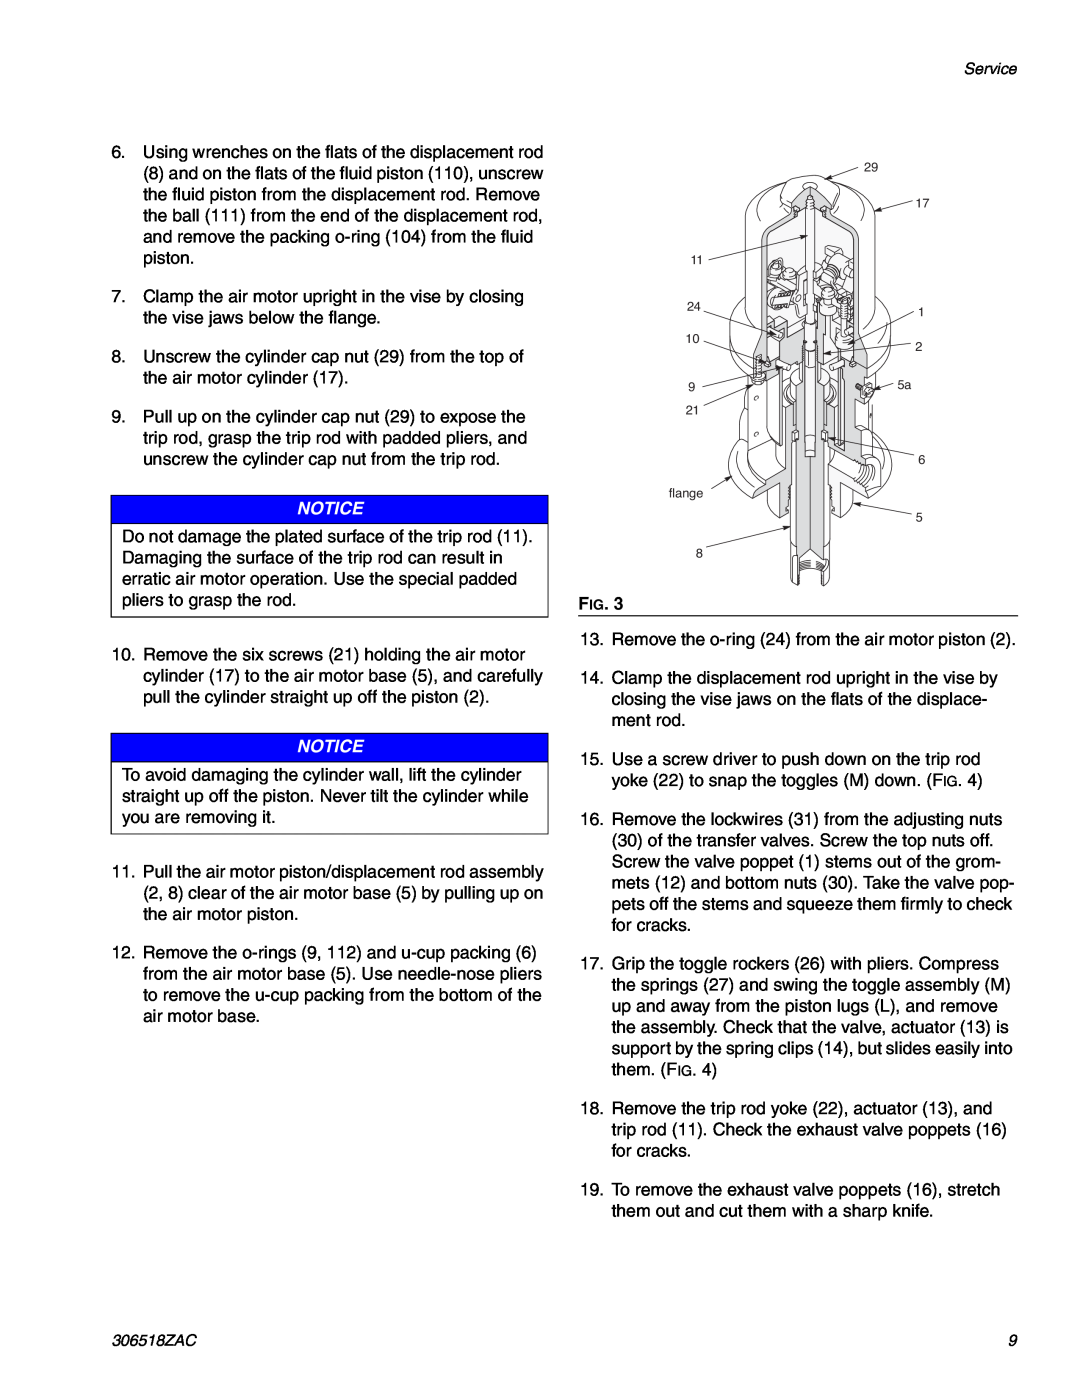 Graco 306518ZAC important safety instructions pliers to grasp the rod 